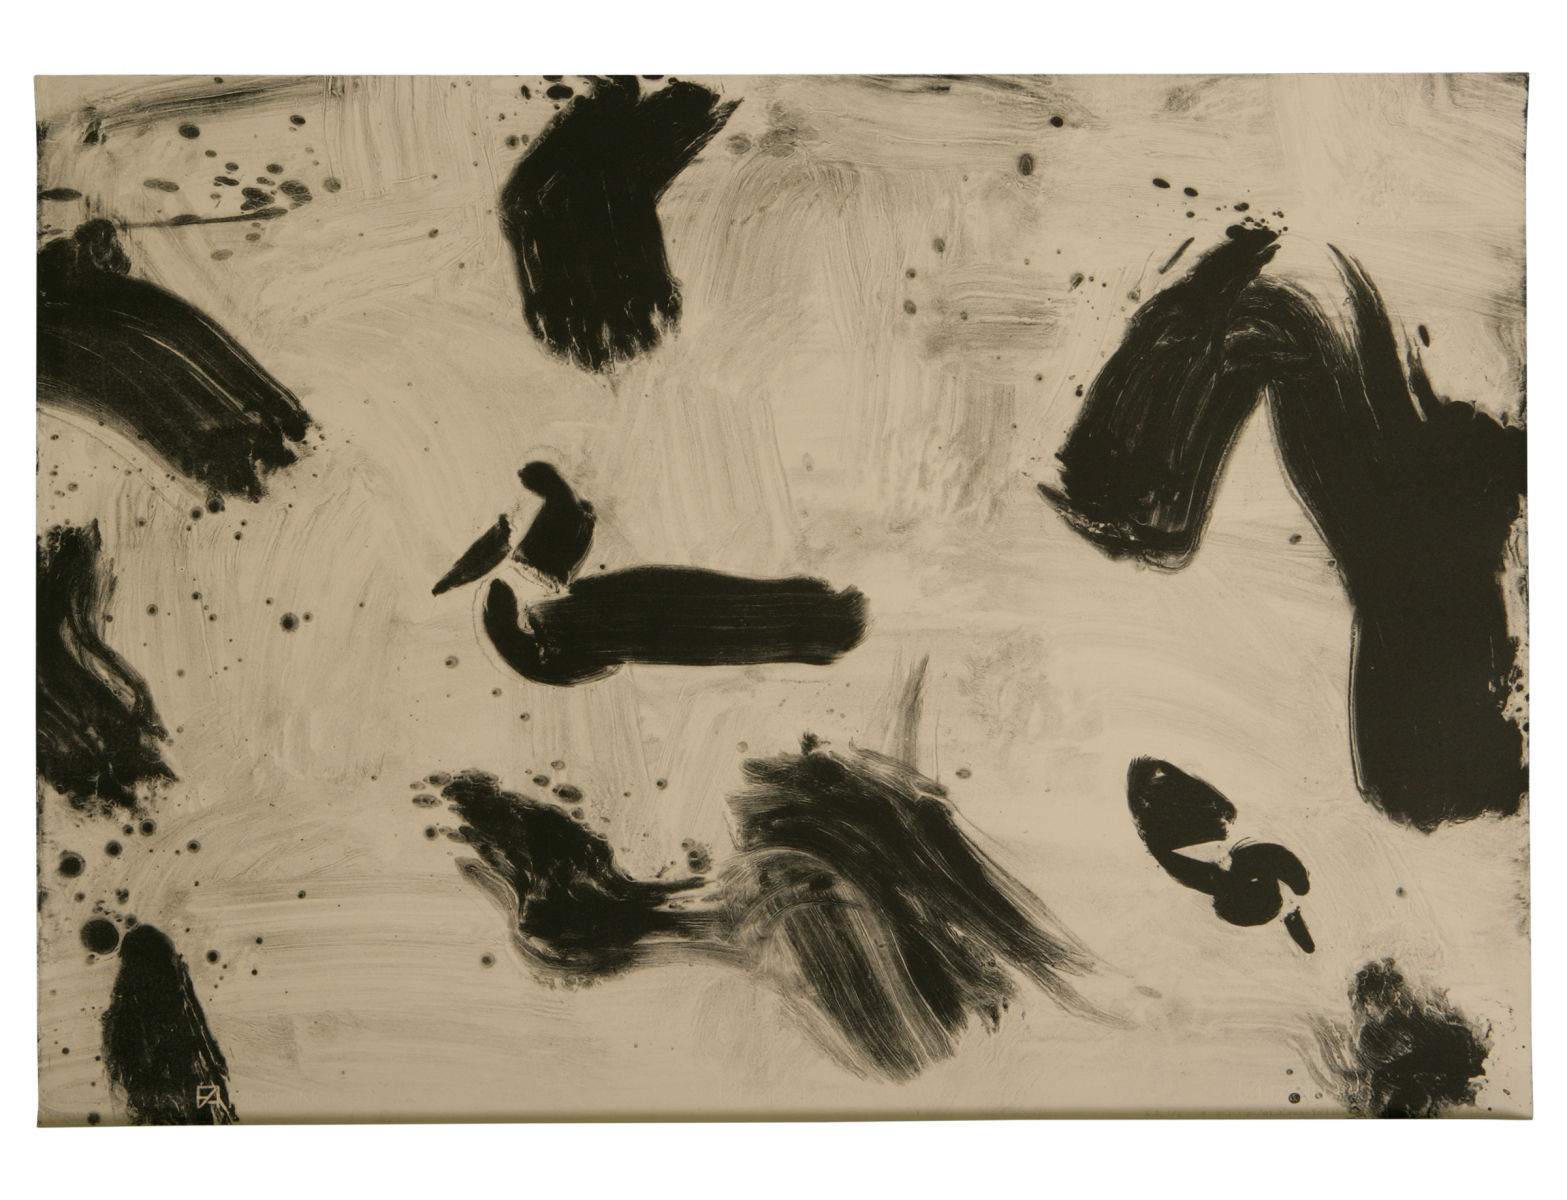 Untitled-93110, 1993, Lithography, 70x100cm